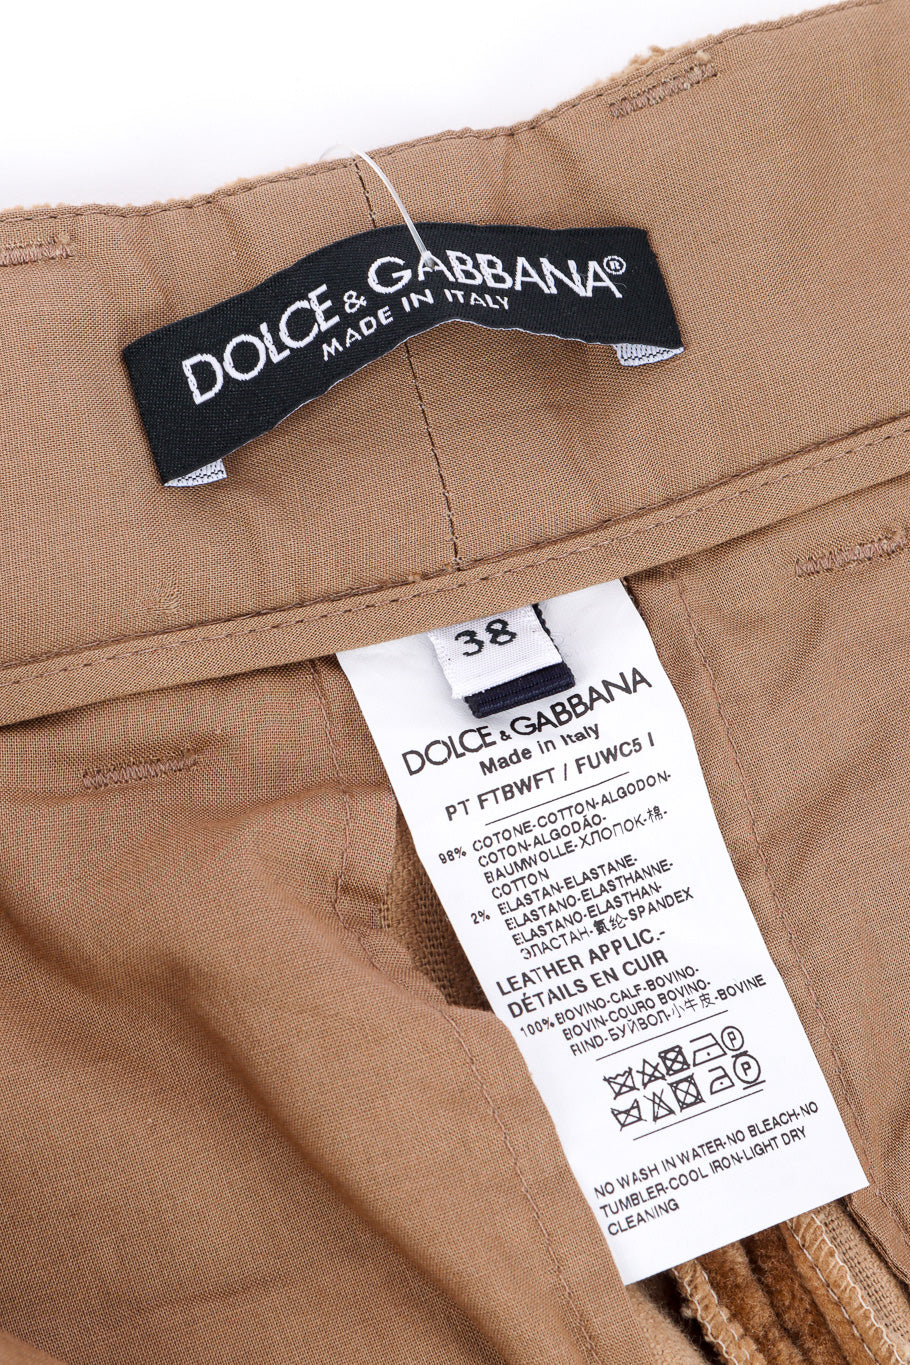 Corduroy Culotte Trouser by Dolce & Gabbana label and fabric tag @recessla